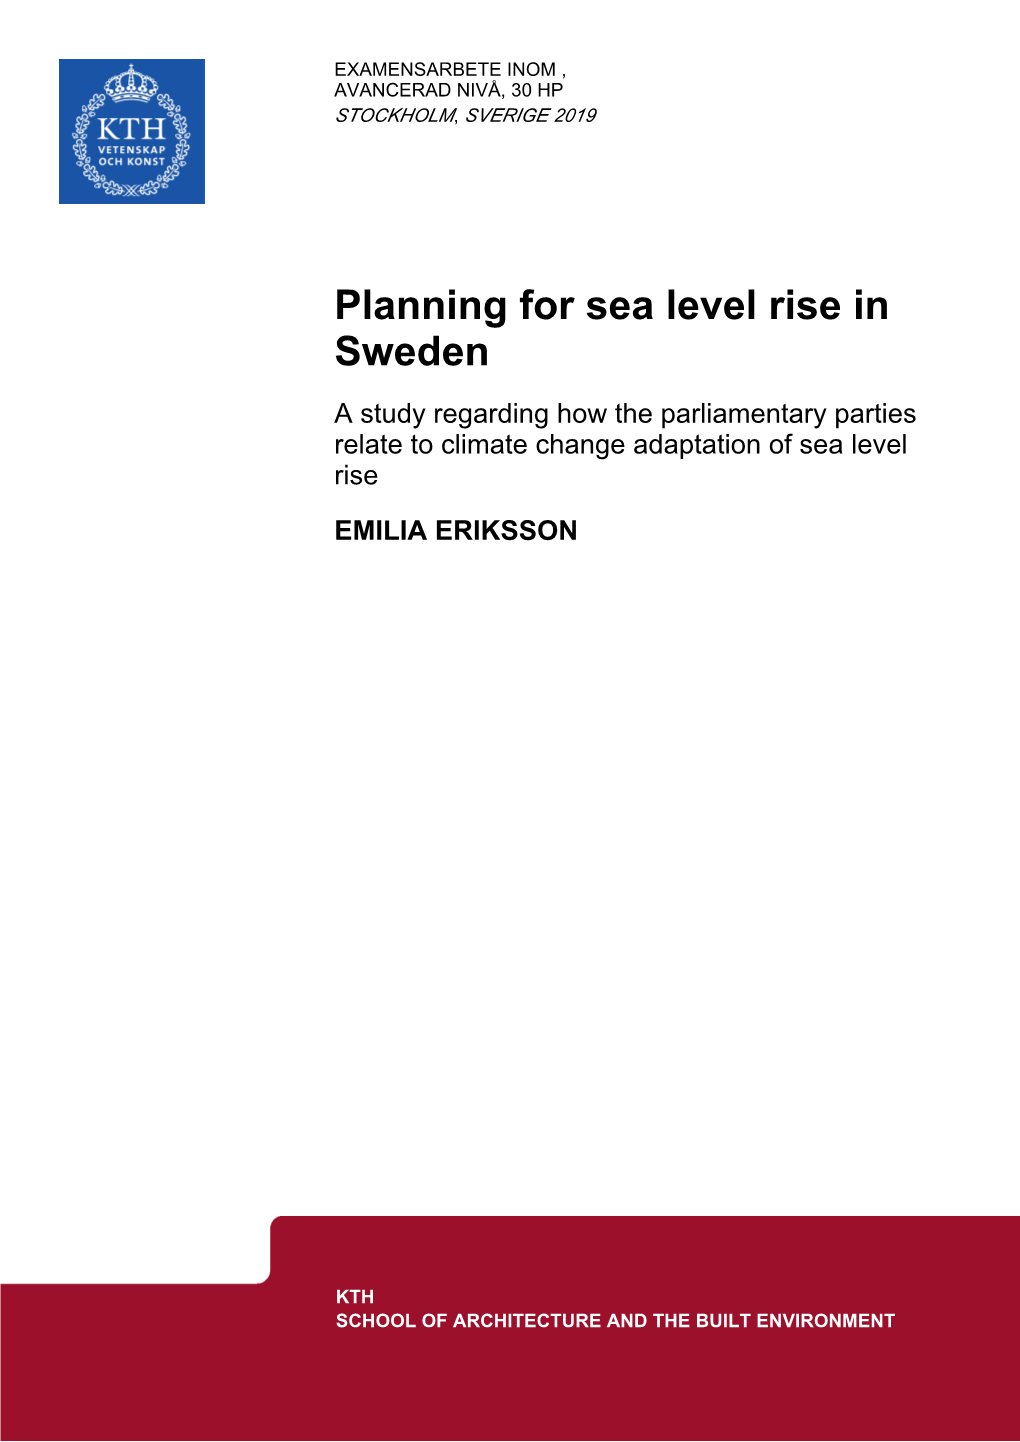 Planning for Sea Level Rise in Sweden a Study Regarding How the Parliamentary Parties Relate to Climate Change Adaptation of Sea Level Rise